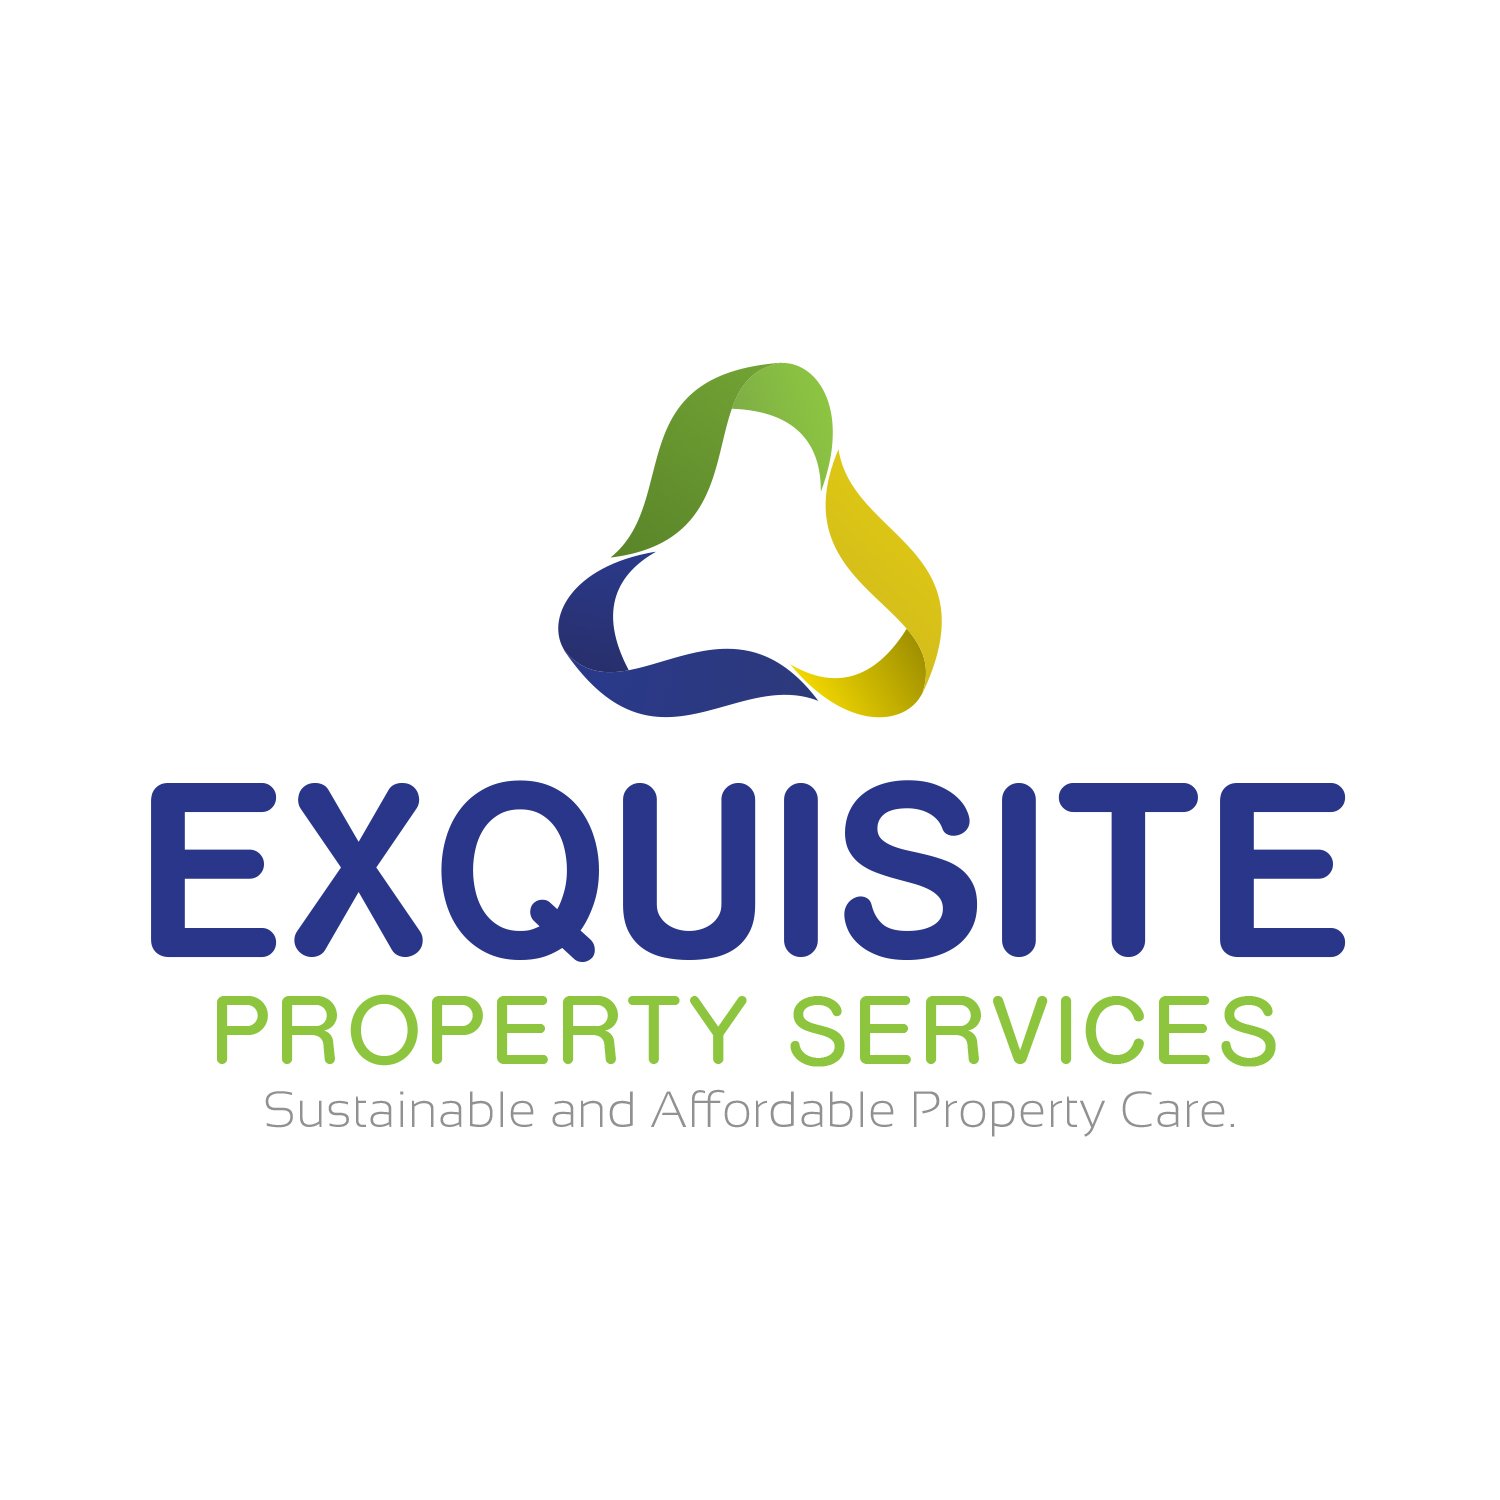 EPS is a sustainable and affordable property care service company that provide quality customer service.